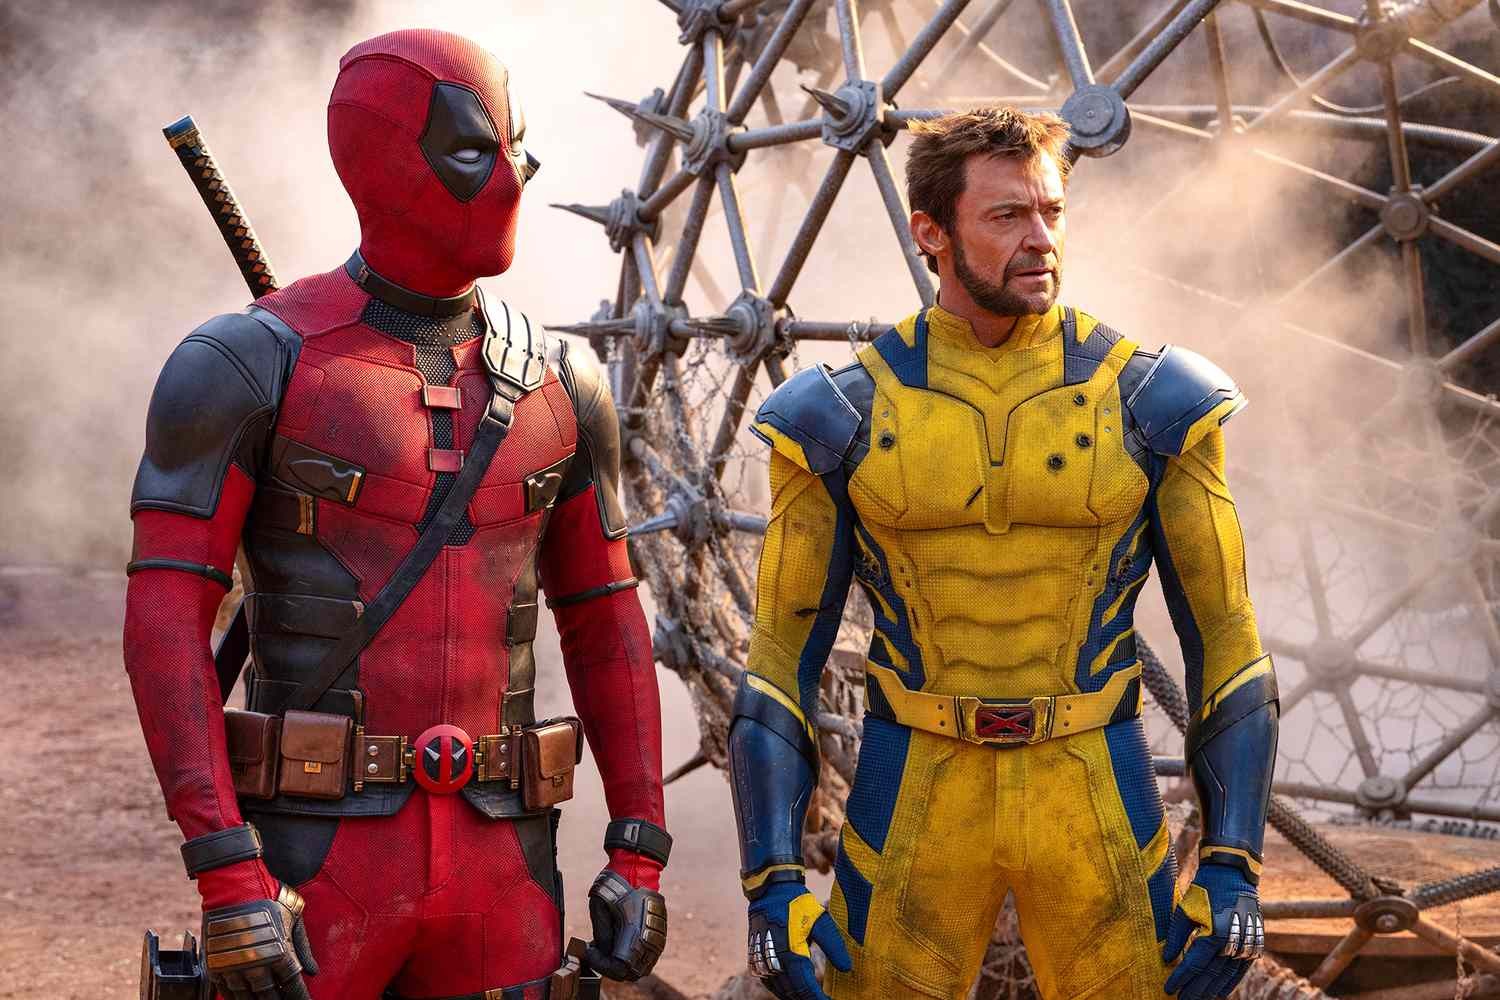 Deadpool & Wolverine may tease future appearances of it two characters in future MCU films | Marvel Studios